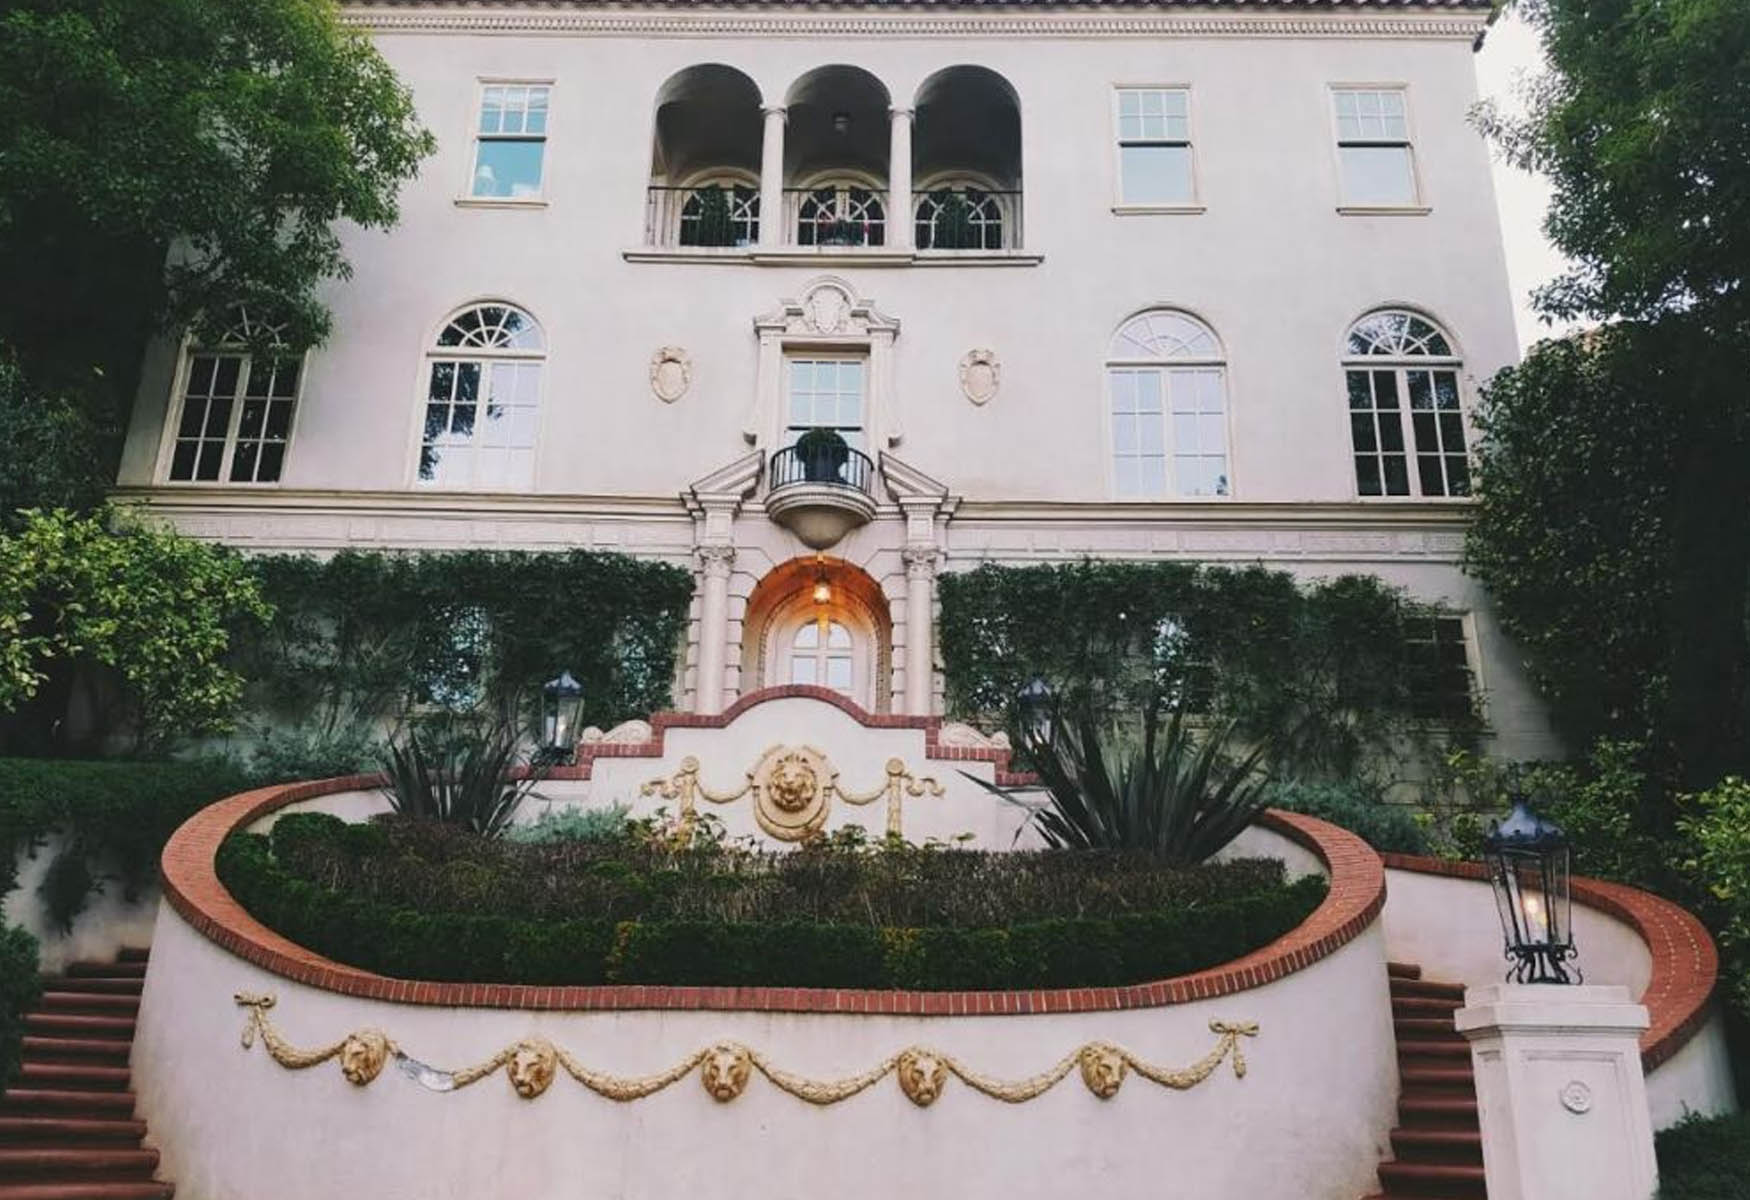 Iconic San Francisco Home Featured In “The Princess Diaries” Hits The Market For $6.5M